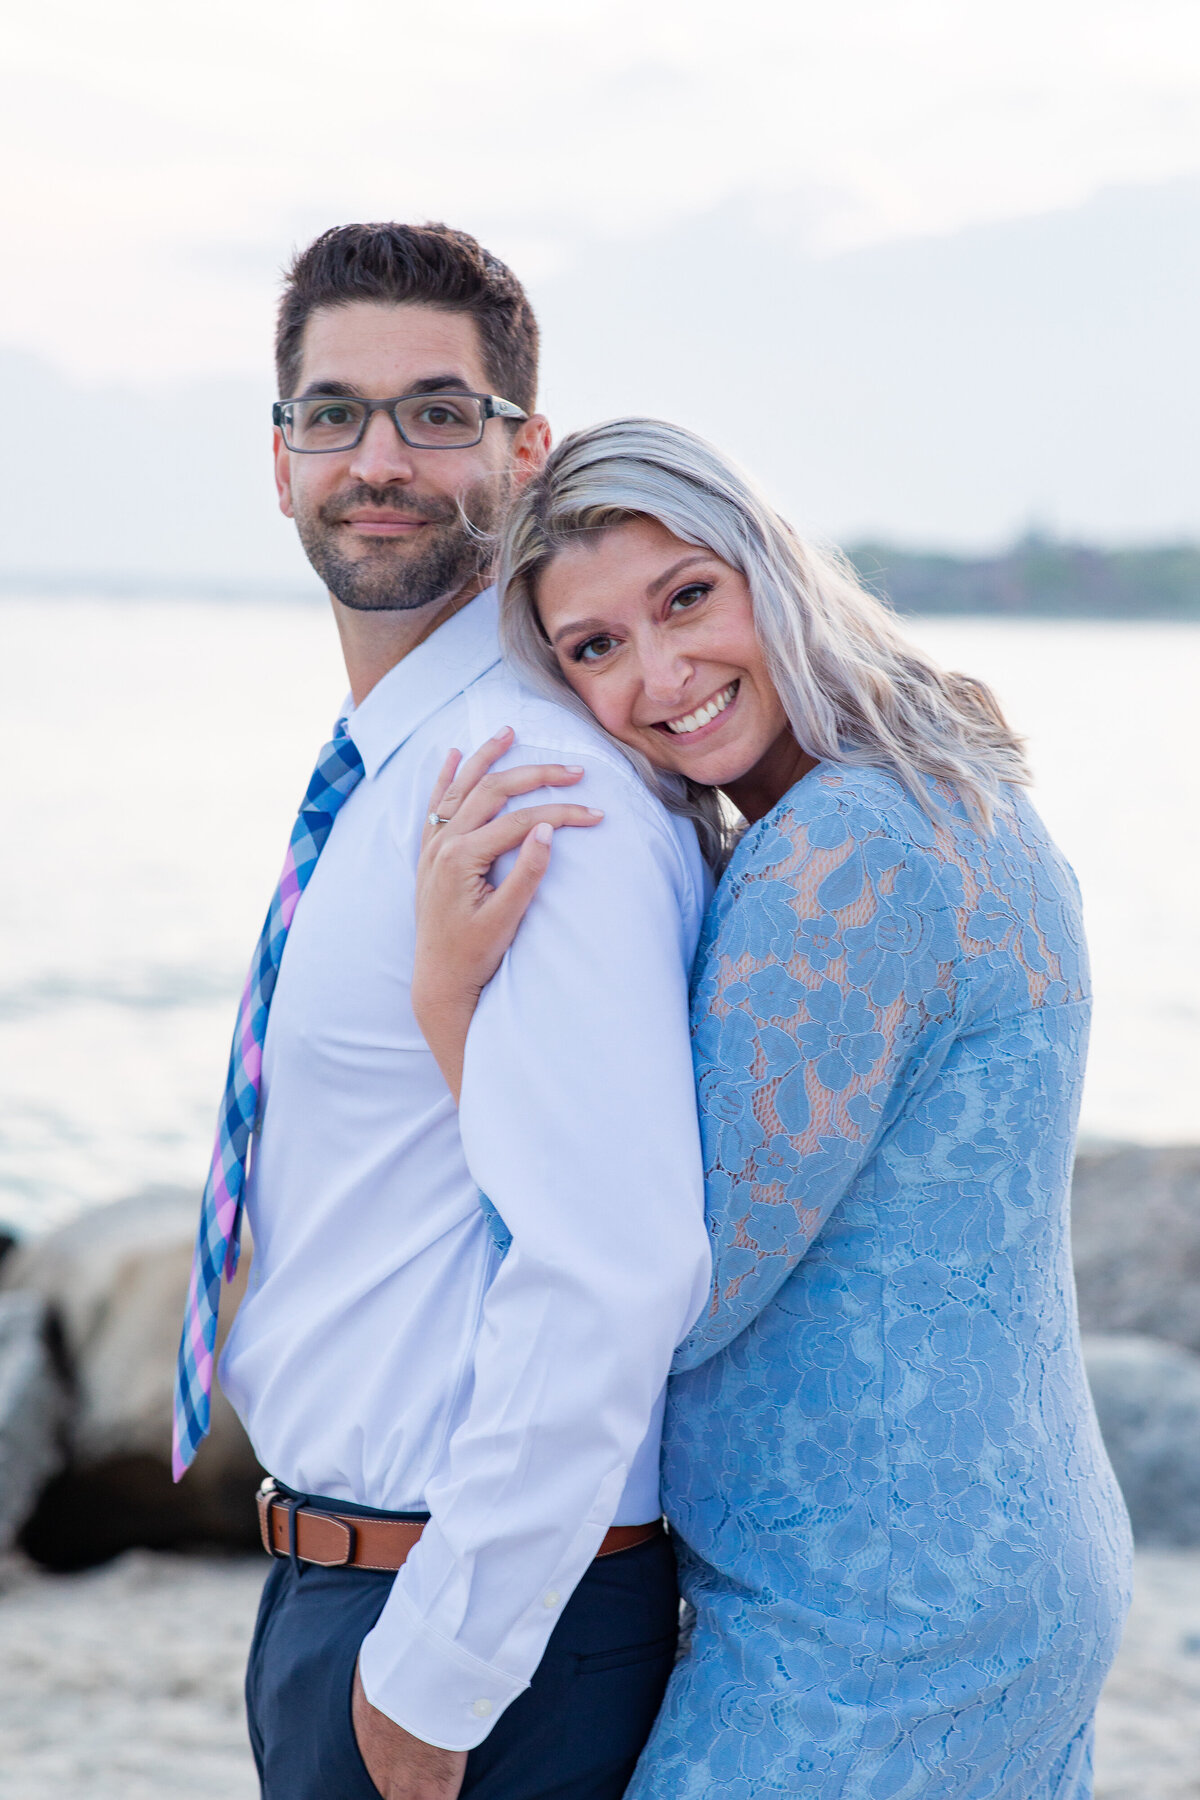 Harkness-Memorial-Park-engagement-session-Kelly-Pomeroy-Photography-Marissa-Mike--261